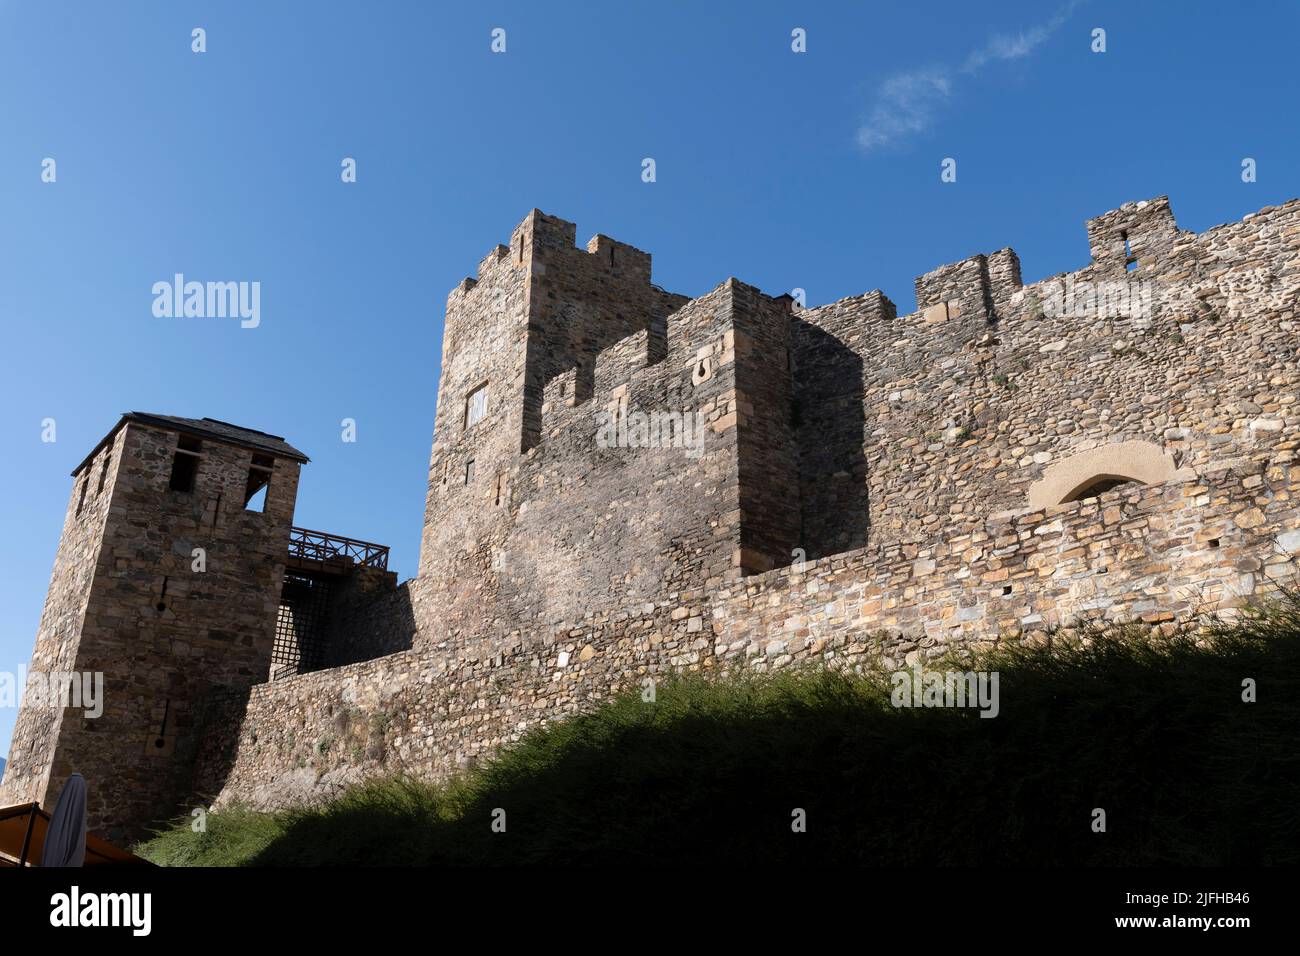 View of the landmark Castillo de los Templarios on the Camino Frances route of the Way of St. James in Ponferrada, León, Spain. This ancient route of Stock Photo